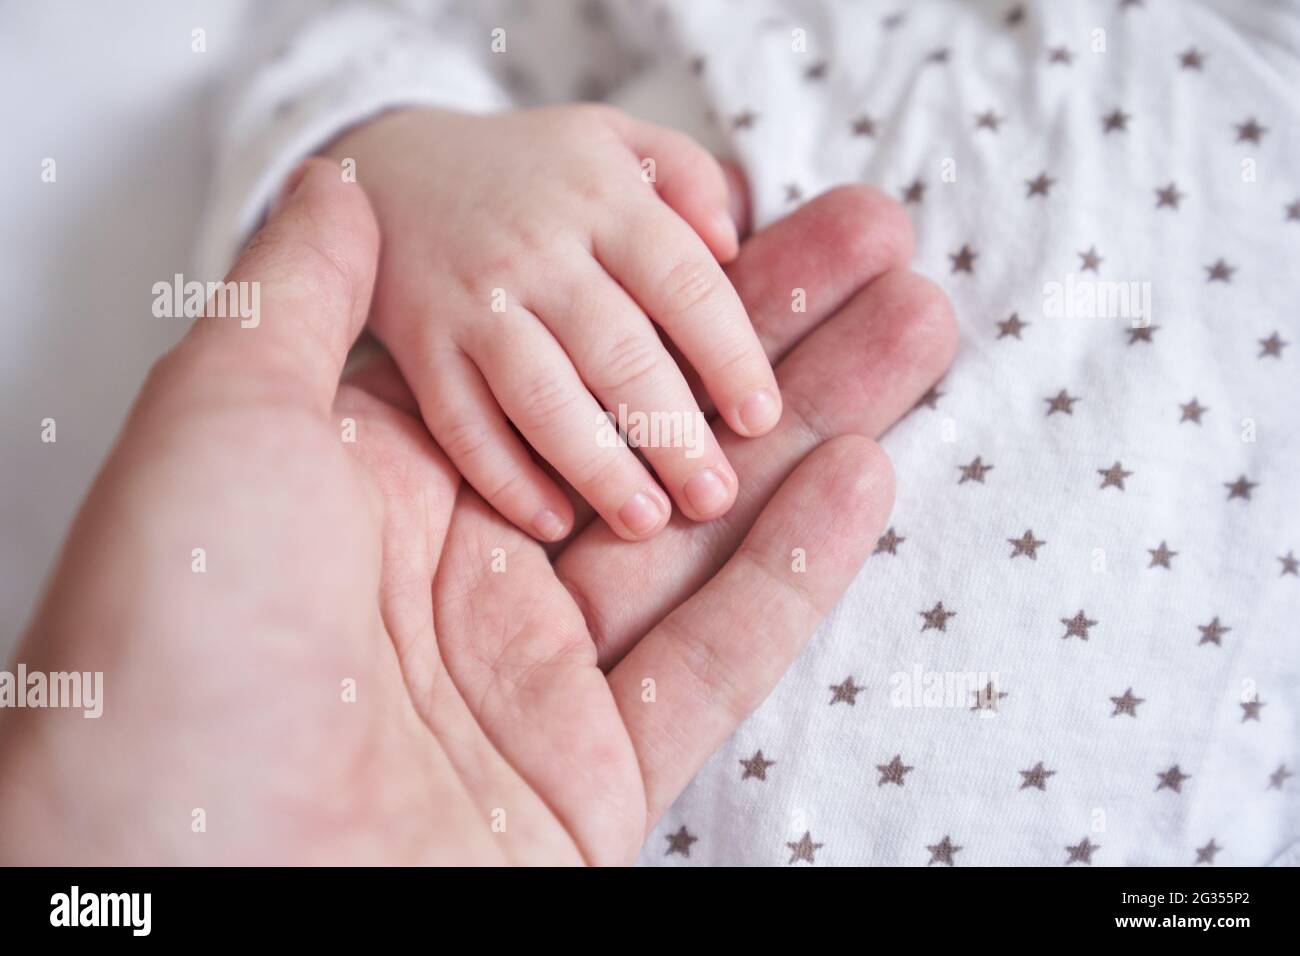 https://c8.alamy.com/comp/2G355P2/mothers-hand-holding-baby-hand-the-baby-is-one-month-old-cute-little-hand-with-small-fingers-concept-of-love-and-care-background-high-quality-photo-2G355P2.jpg